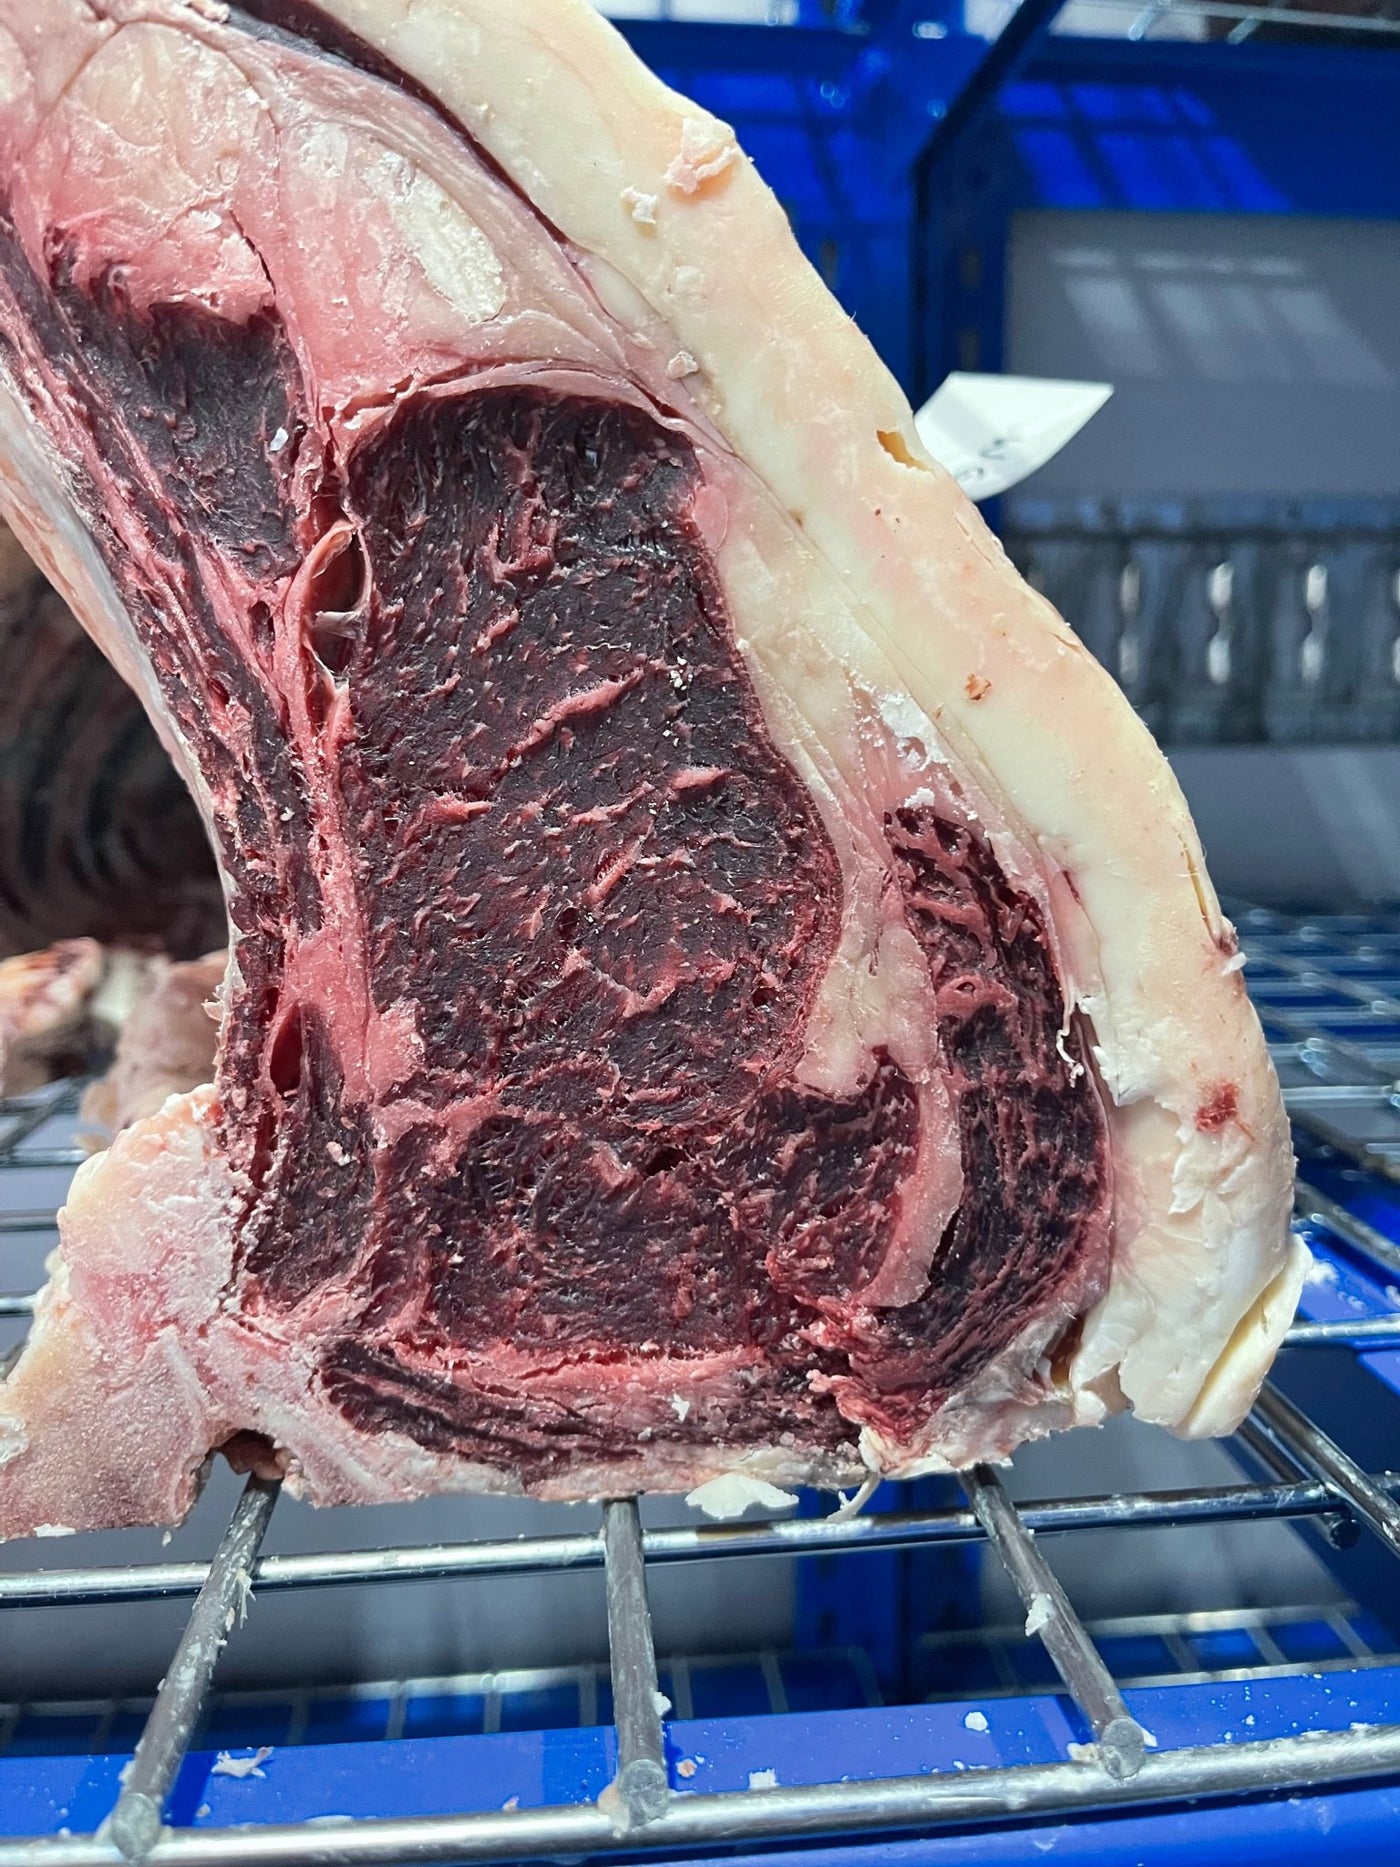 60 Day Dry-Aged White Galloway Cross Cote De Boeuf - Thomas Joseph Butchery - Ethical Dry-Aged Meat The Best Steak UK Thomas Joseph Butchery